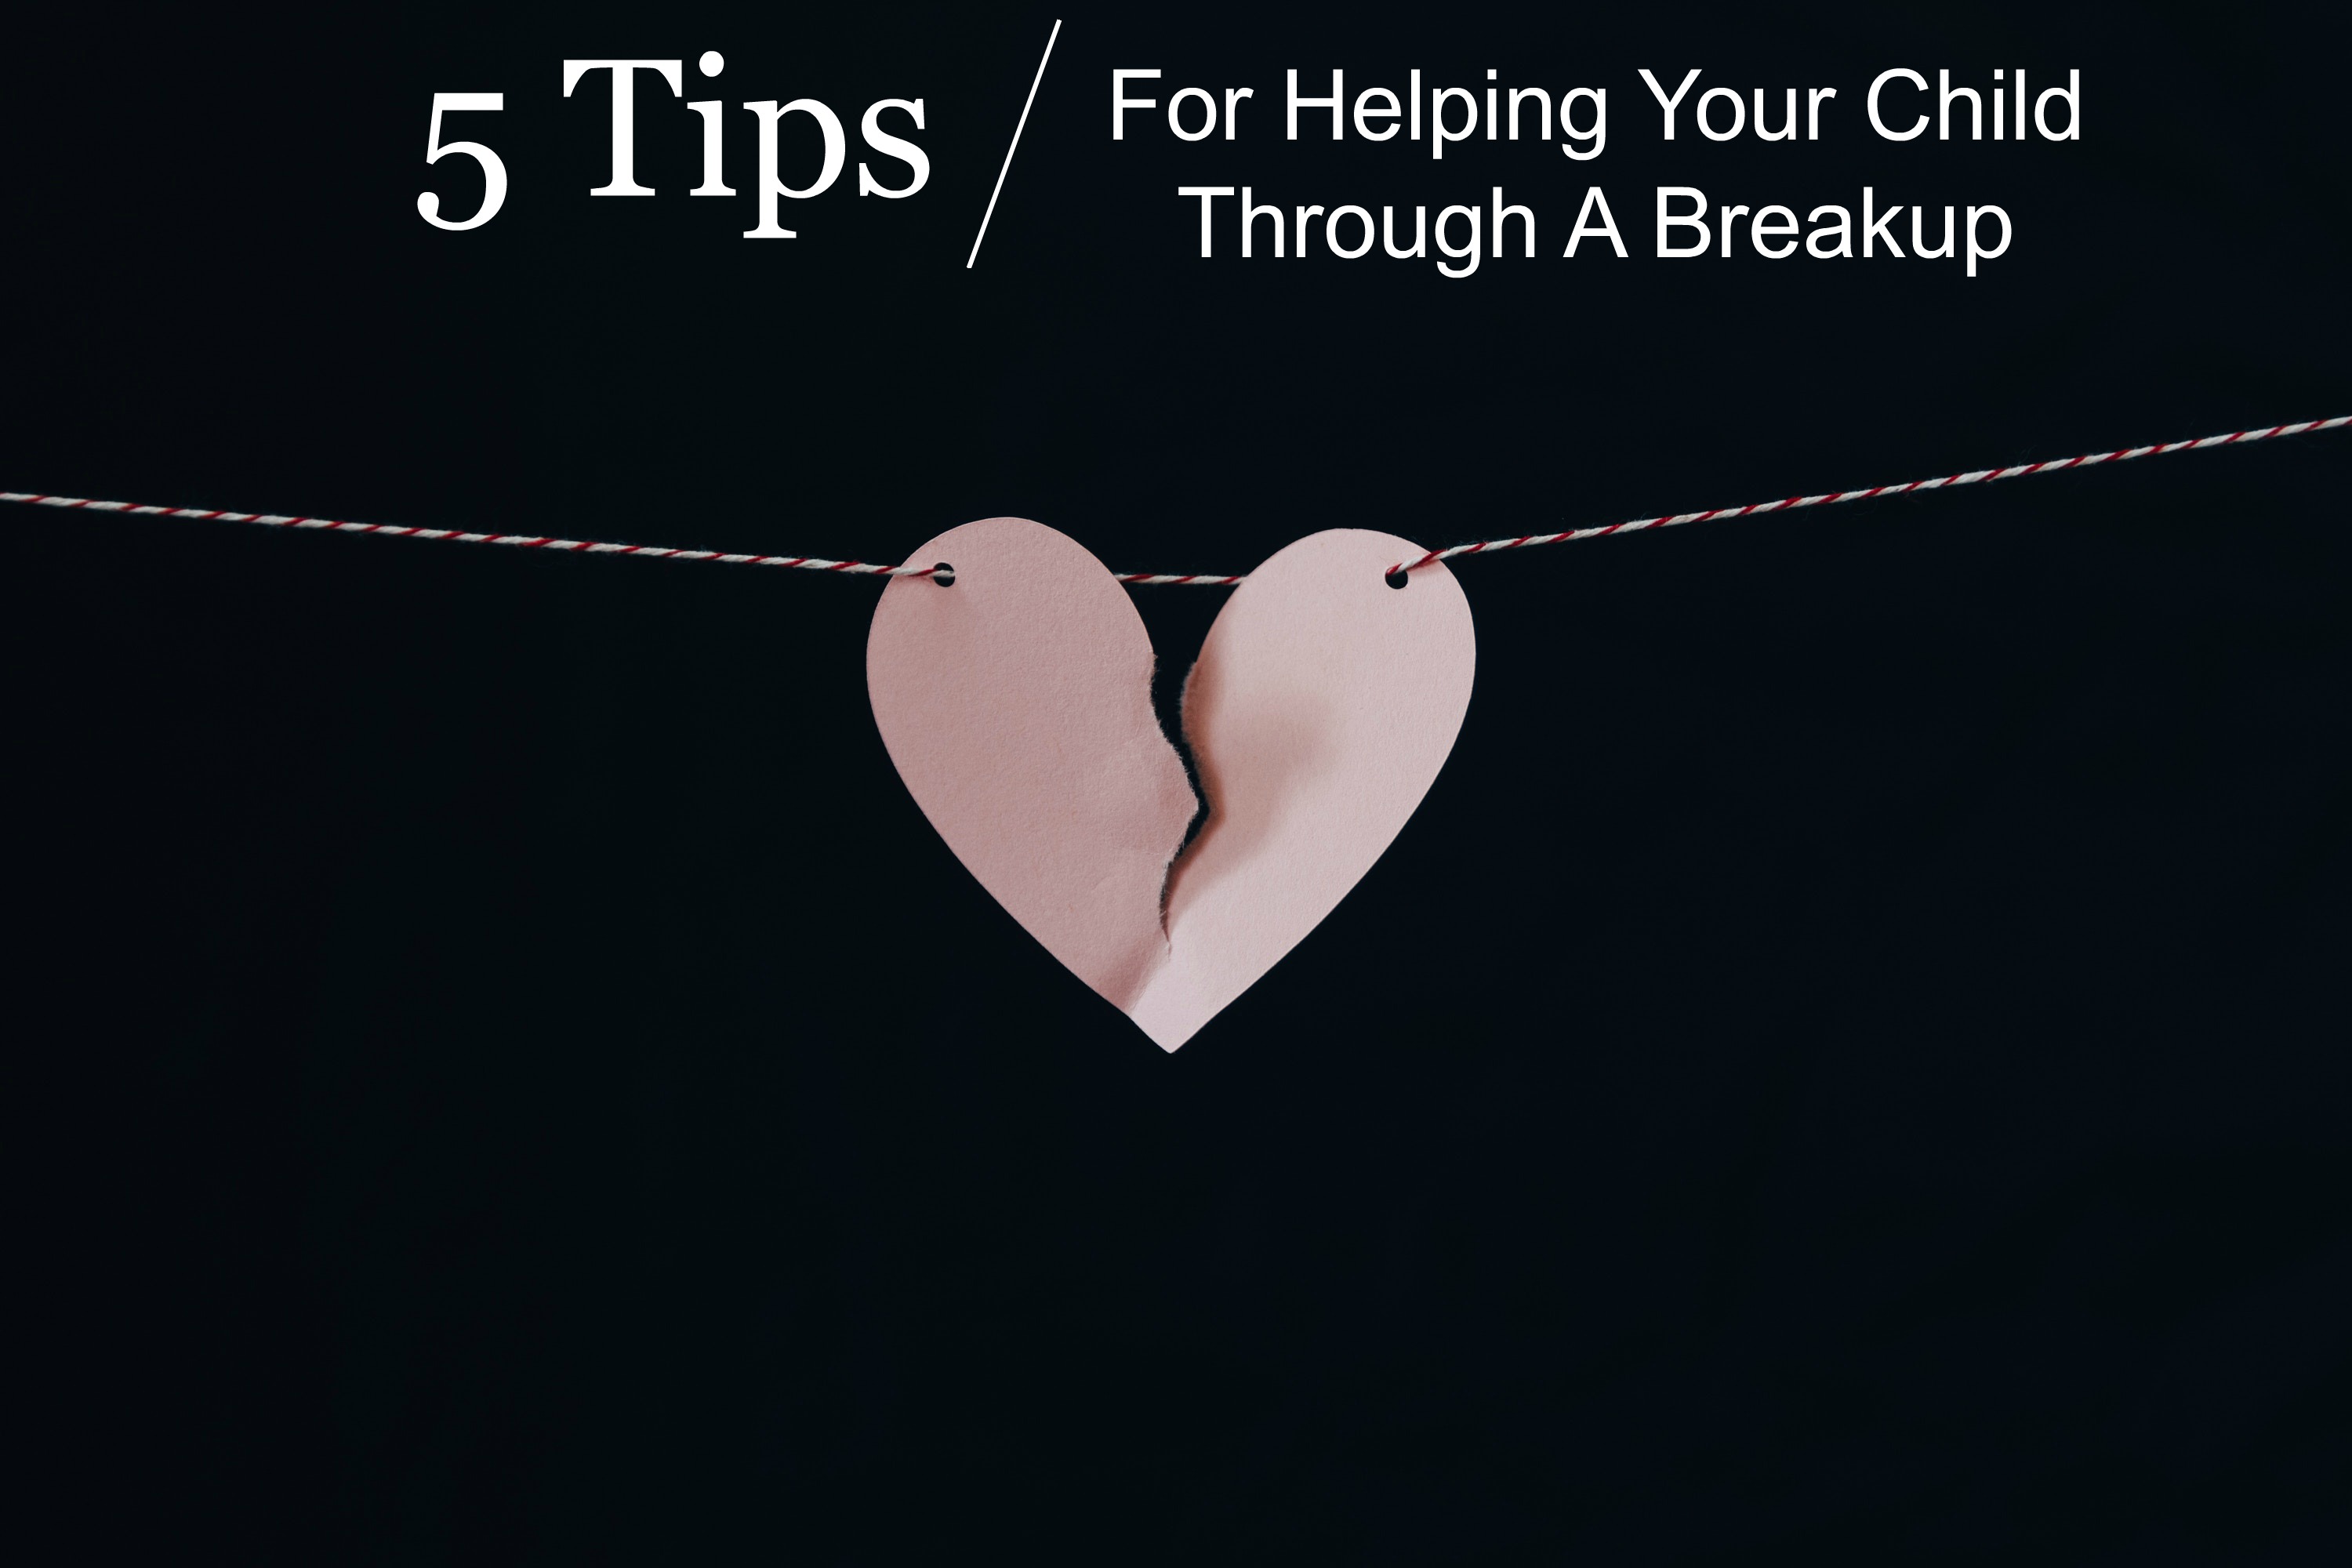 5 Important Tips To Remember When Helping Your Child Through A Breakup